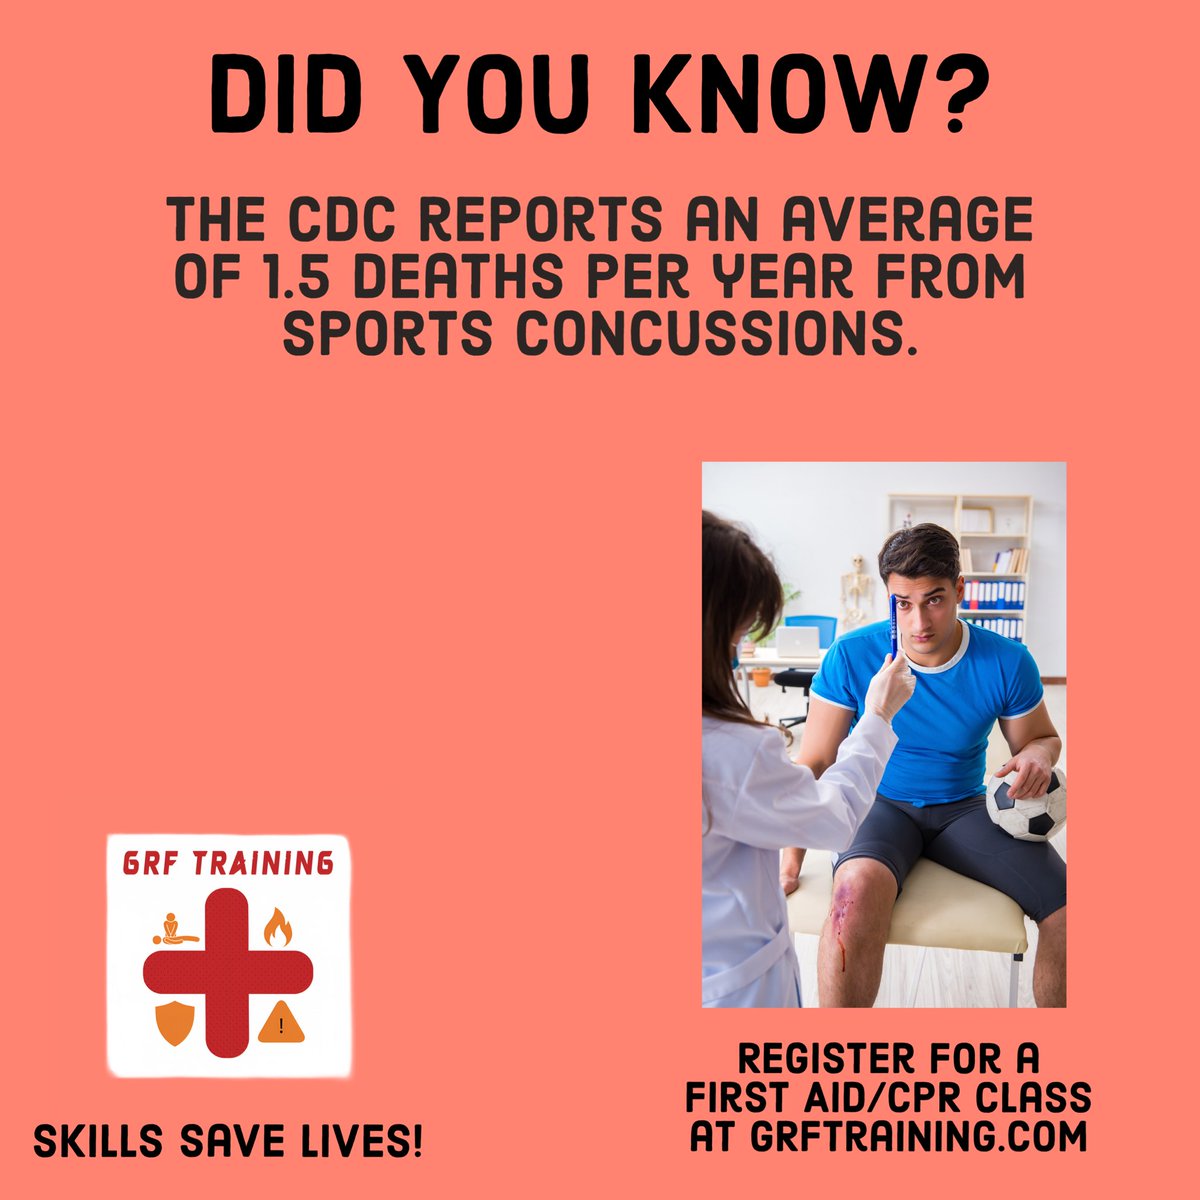 Adult First Aid CPR/AED class
American Legion Post 142
135 E Passaic St
Maywood, NJ 07607
March 25, 2024 at 6pm
Use the link below to sign up!
grftraining.myshopify.com/products/032524
#cprtraining #skillssavelives #firstaidtraining #grftraining #cprtraining #teachersarehuman #concussion